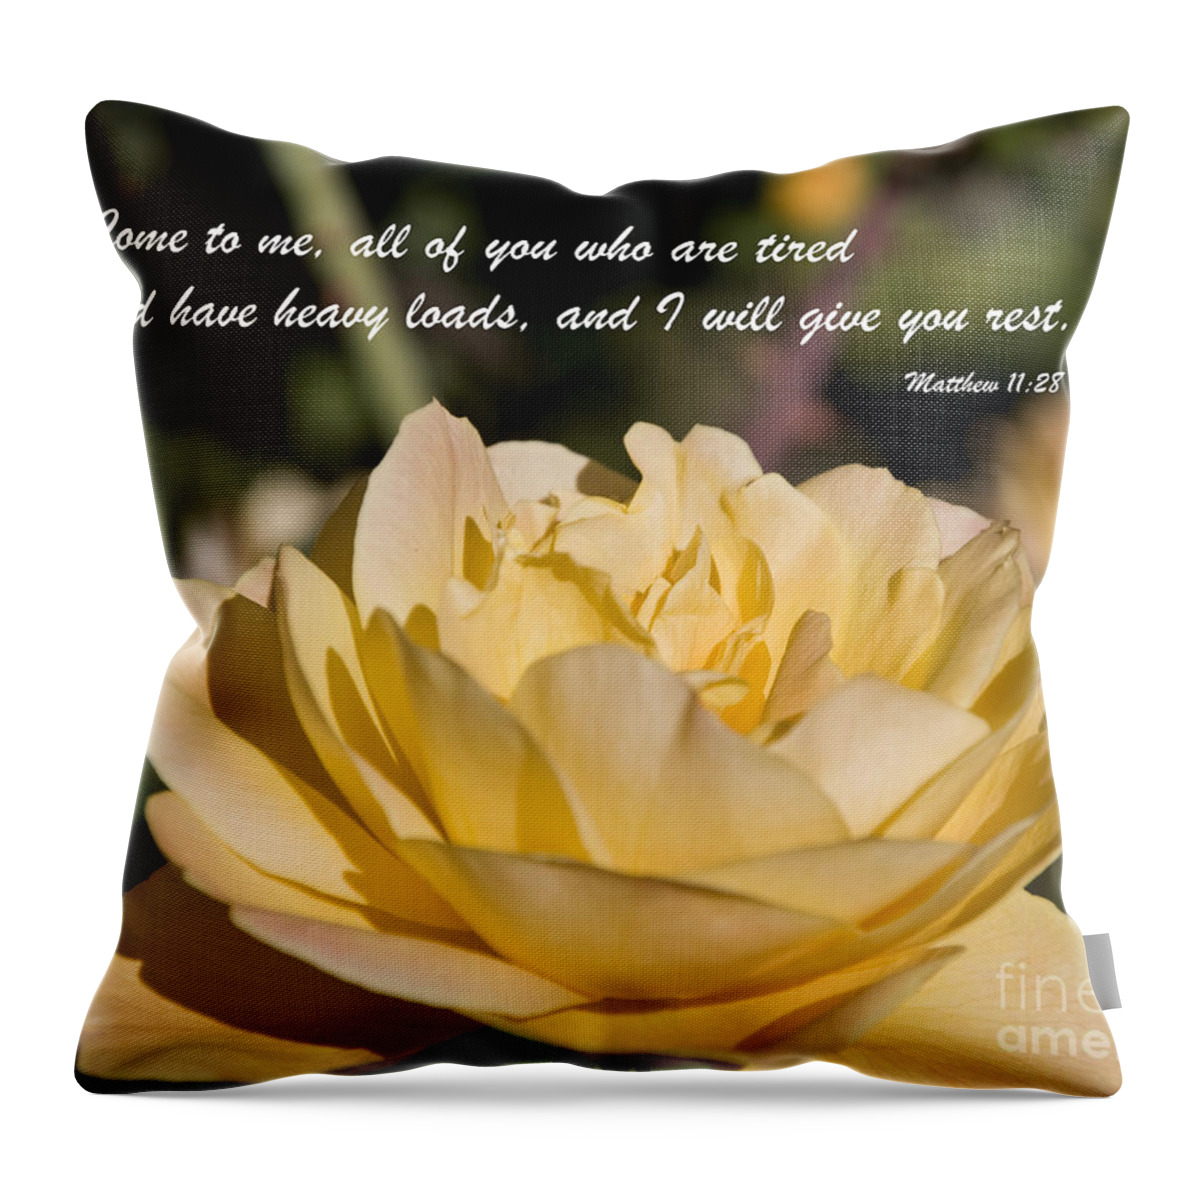 Bible Throw Pillow featuring the photograph I Will Give You Rest by Kirt Tisdale